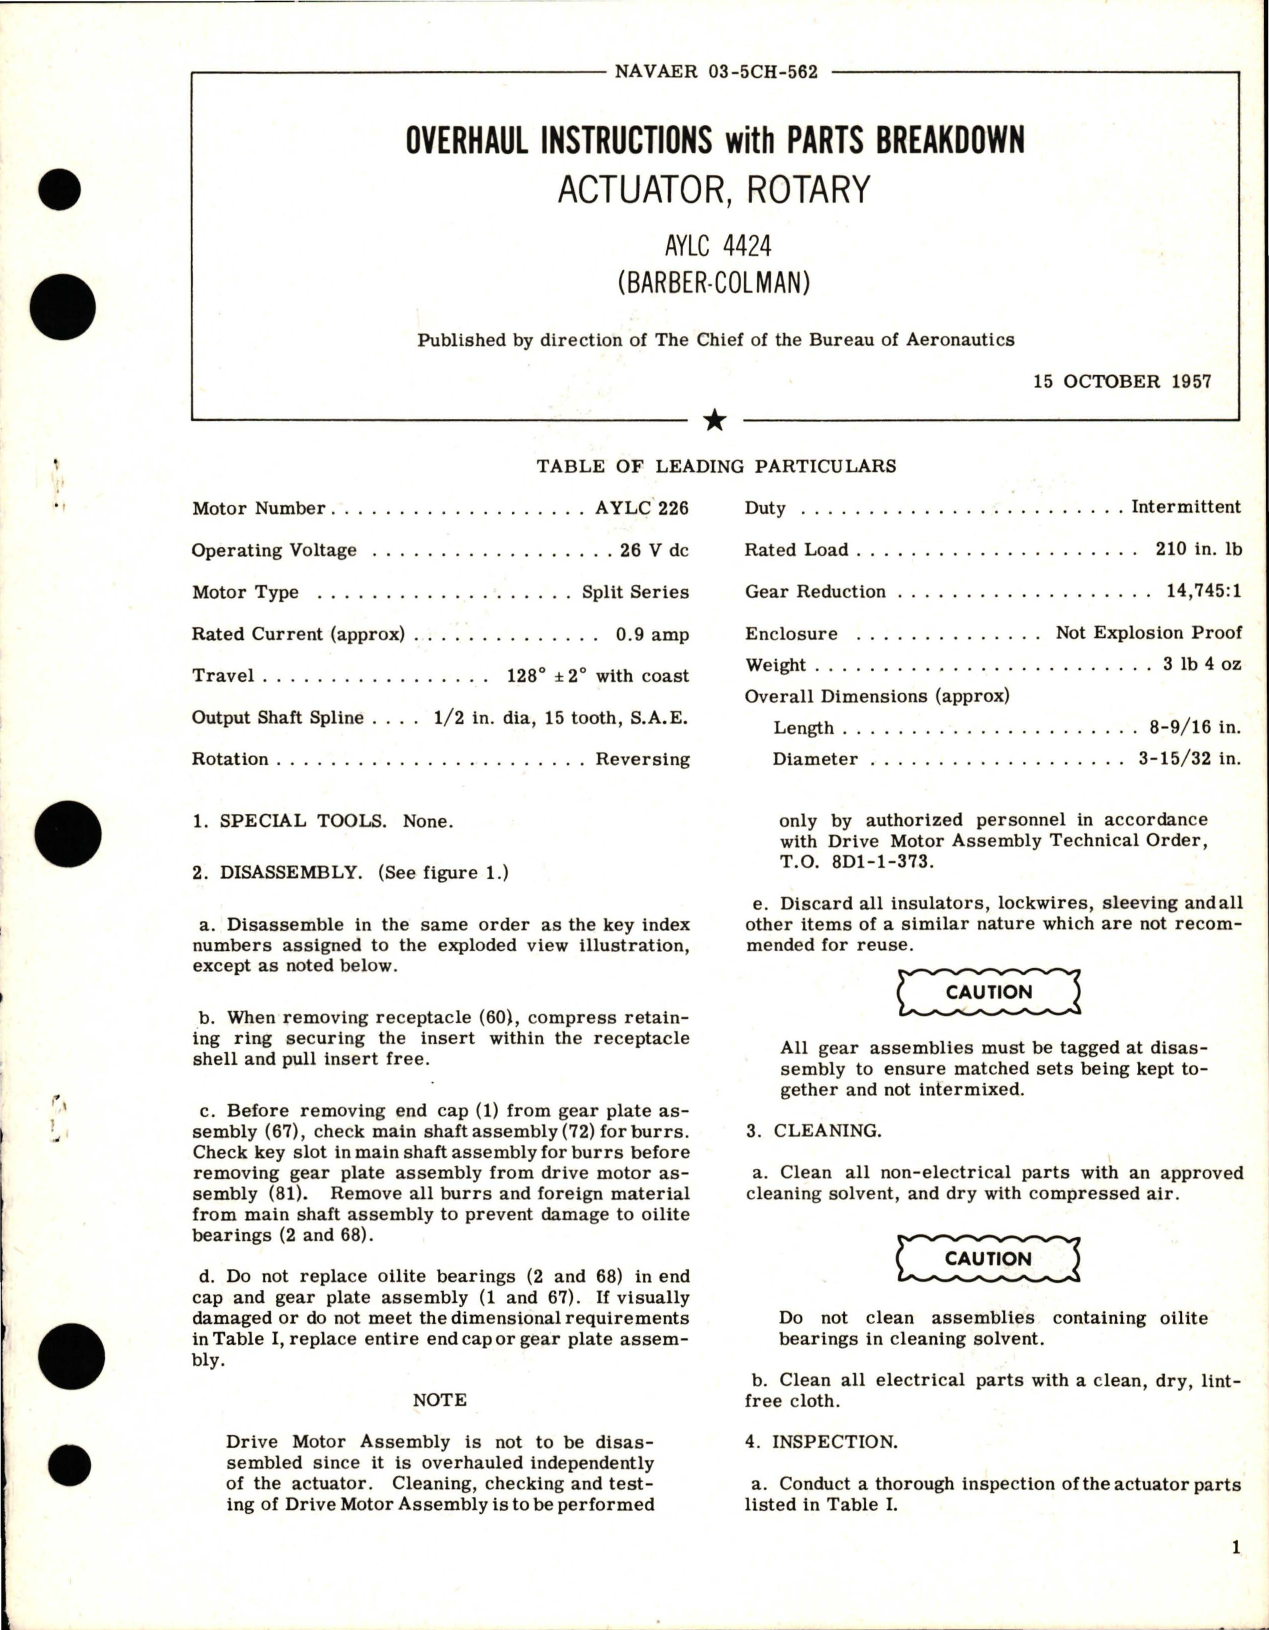 Sample page 1 from AirCorps Library document: Overhaul Instructions with Parts Breakdown for Rotary Actuator - AYLC 4424